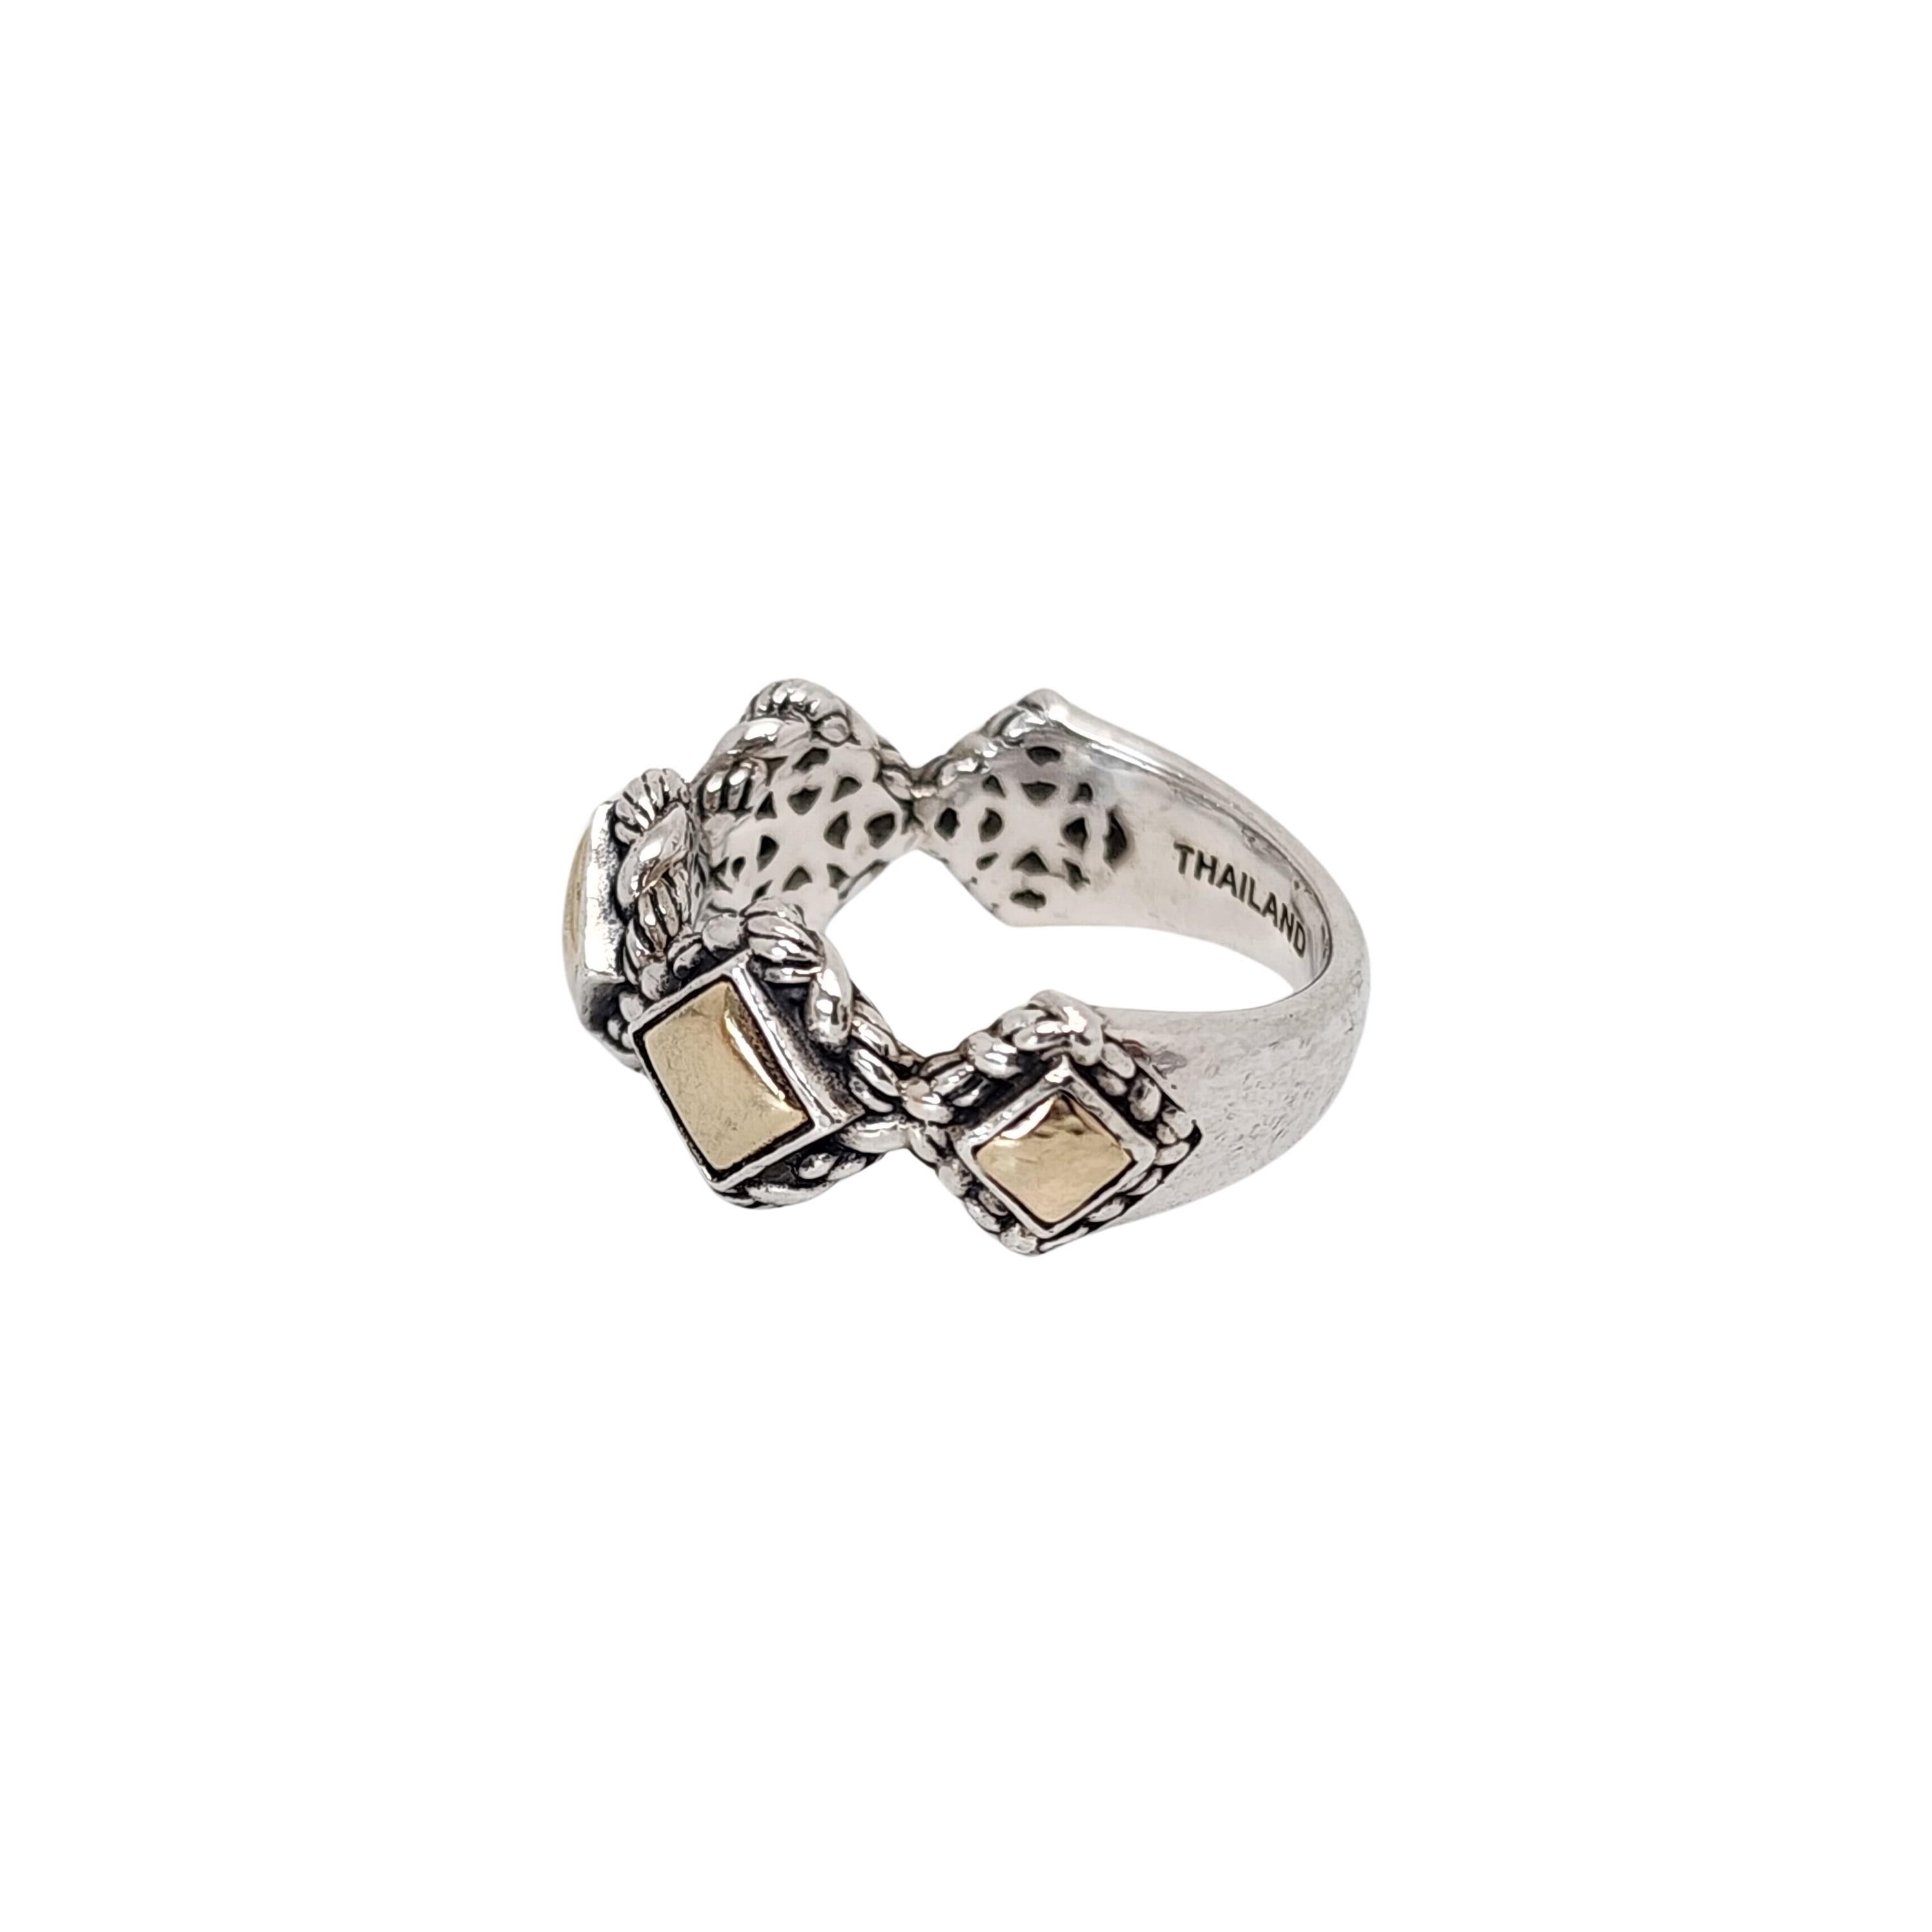 JAI by John Hardy sterling silver 14K yellow gold squares band ring.

Size 6 3/4

From the affordable line JAI by John Hardy for QVC, this ring features yellow gold squares set on its side like a diamond shape. Each square is surrounded in rope